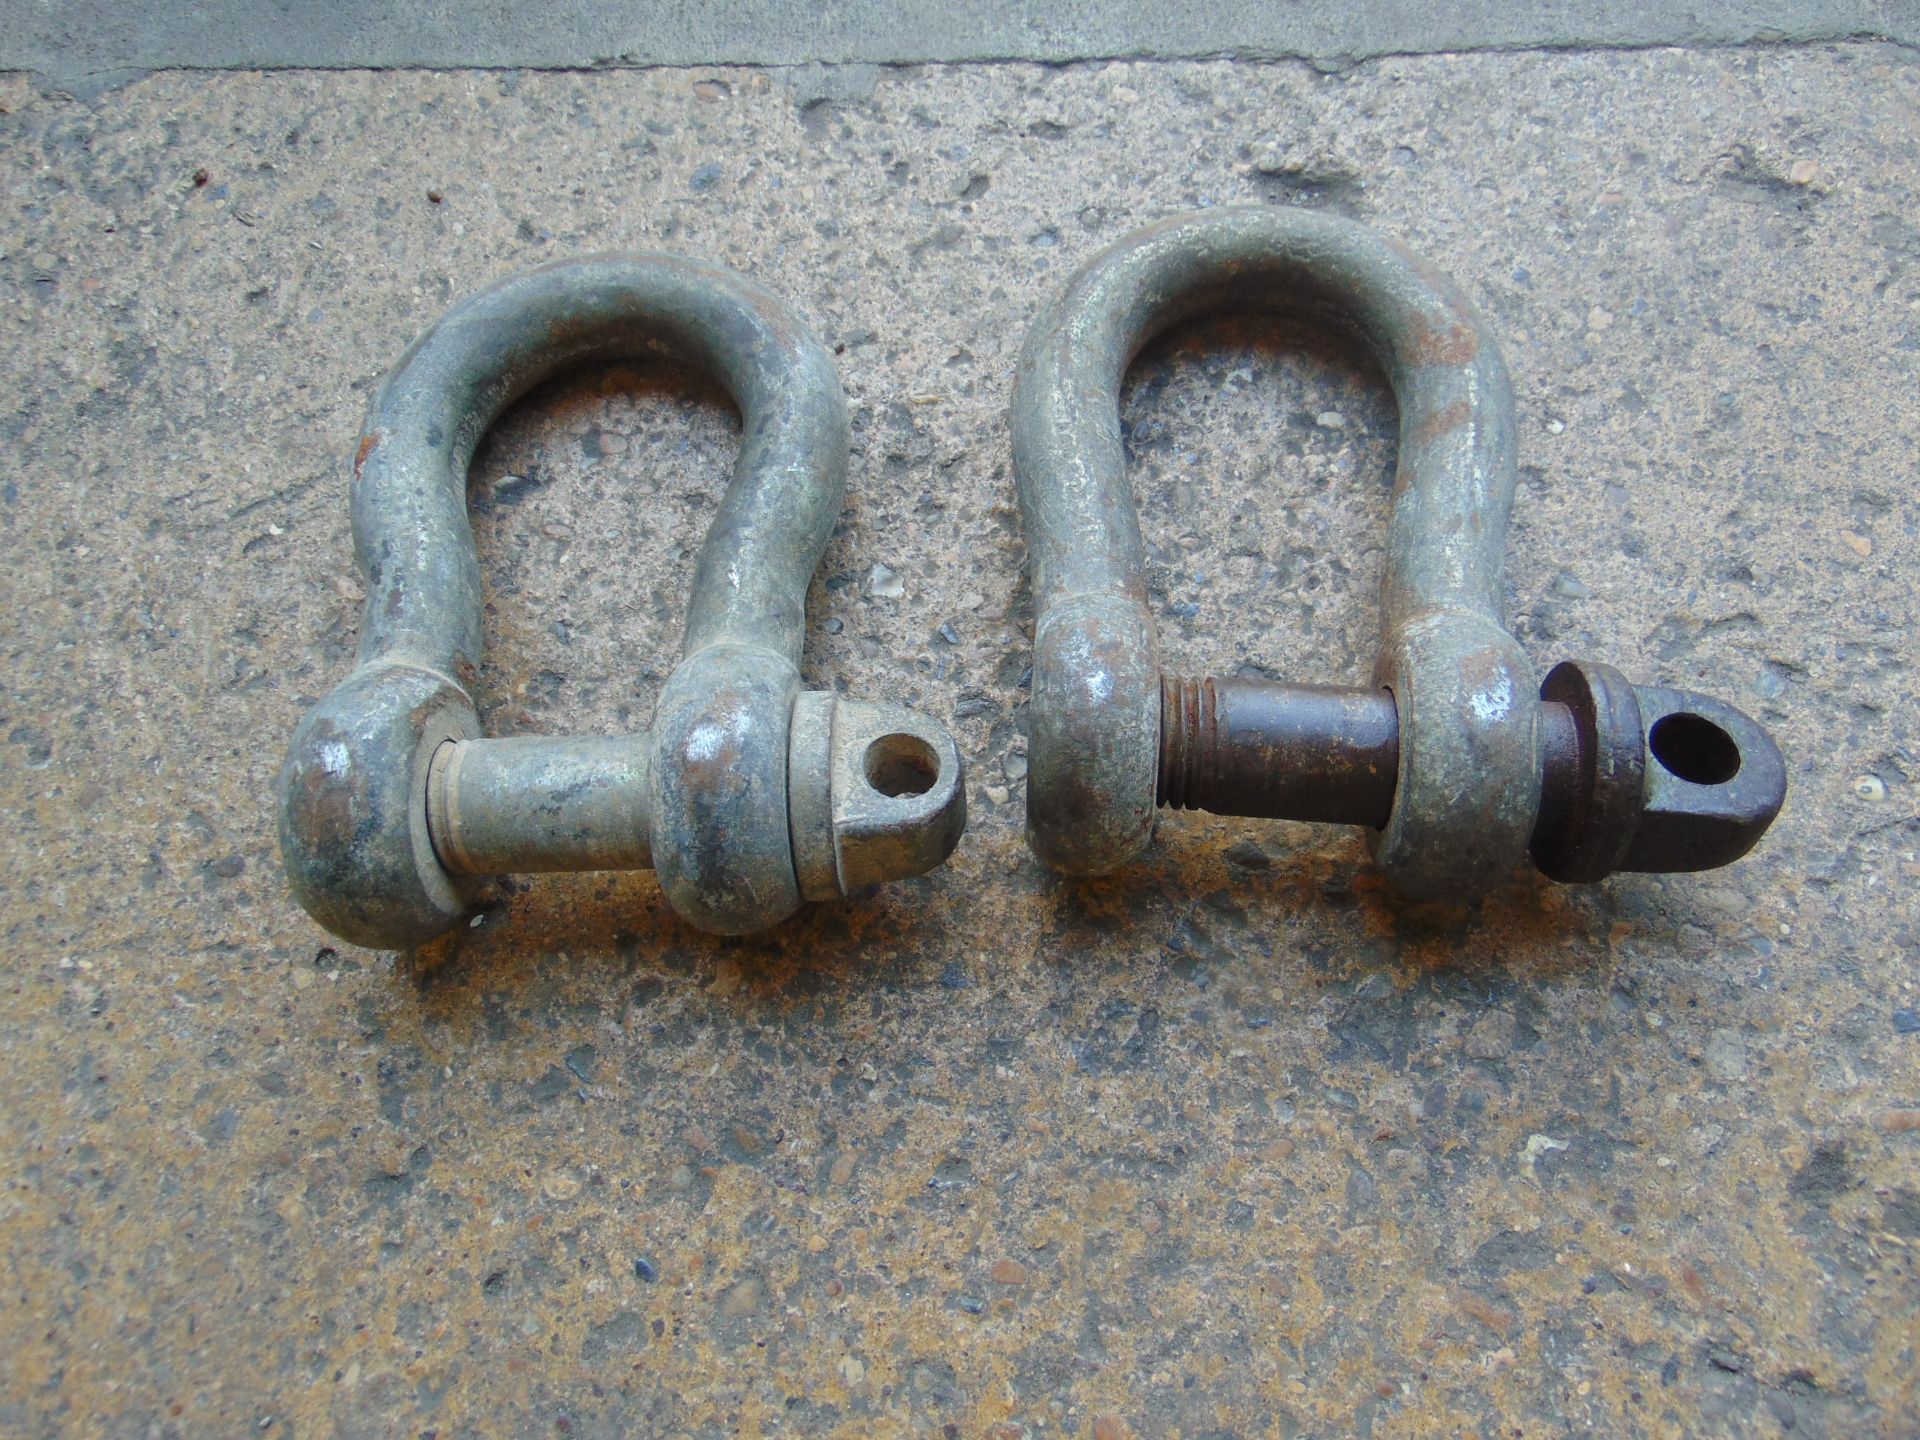 2 x Recovery Bow Shackles Approx. 5.75T